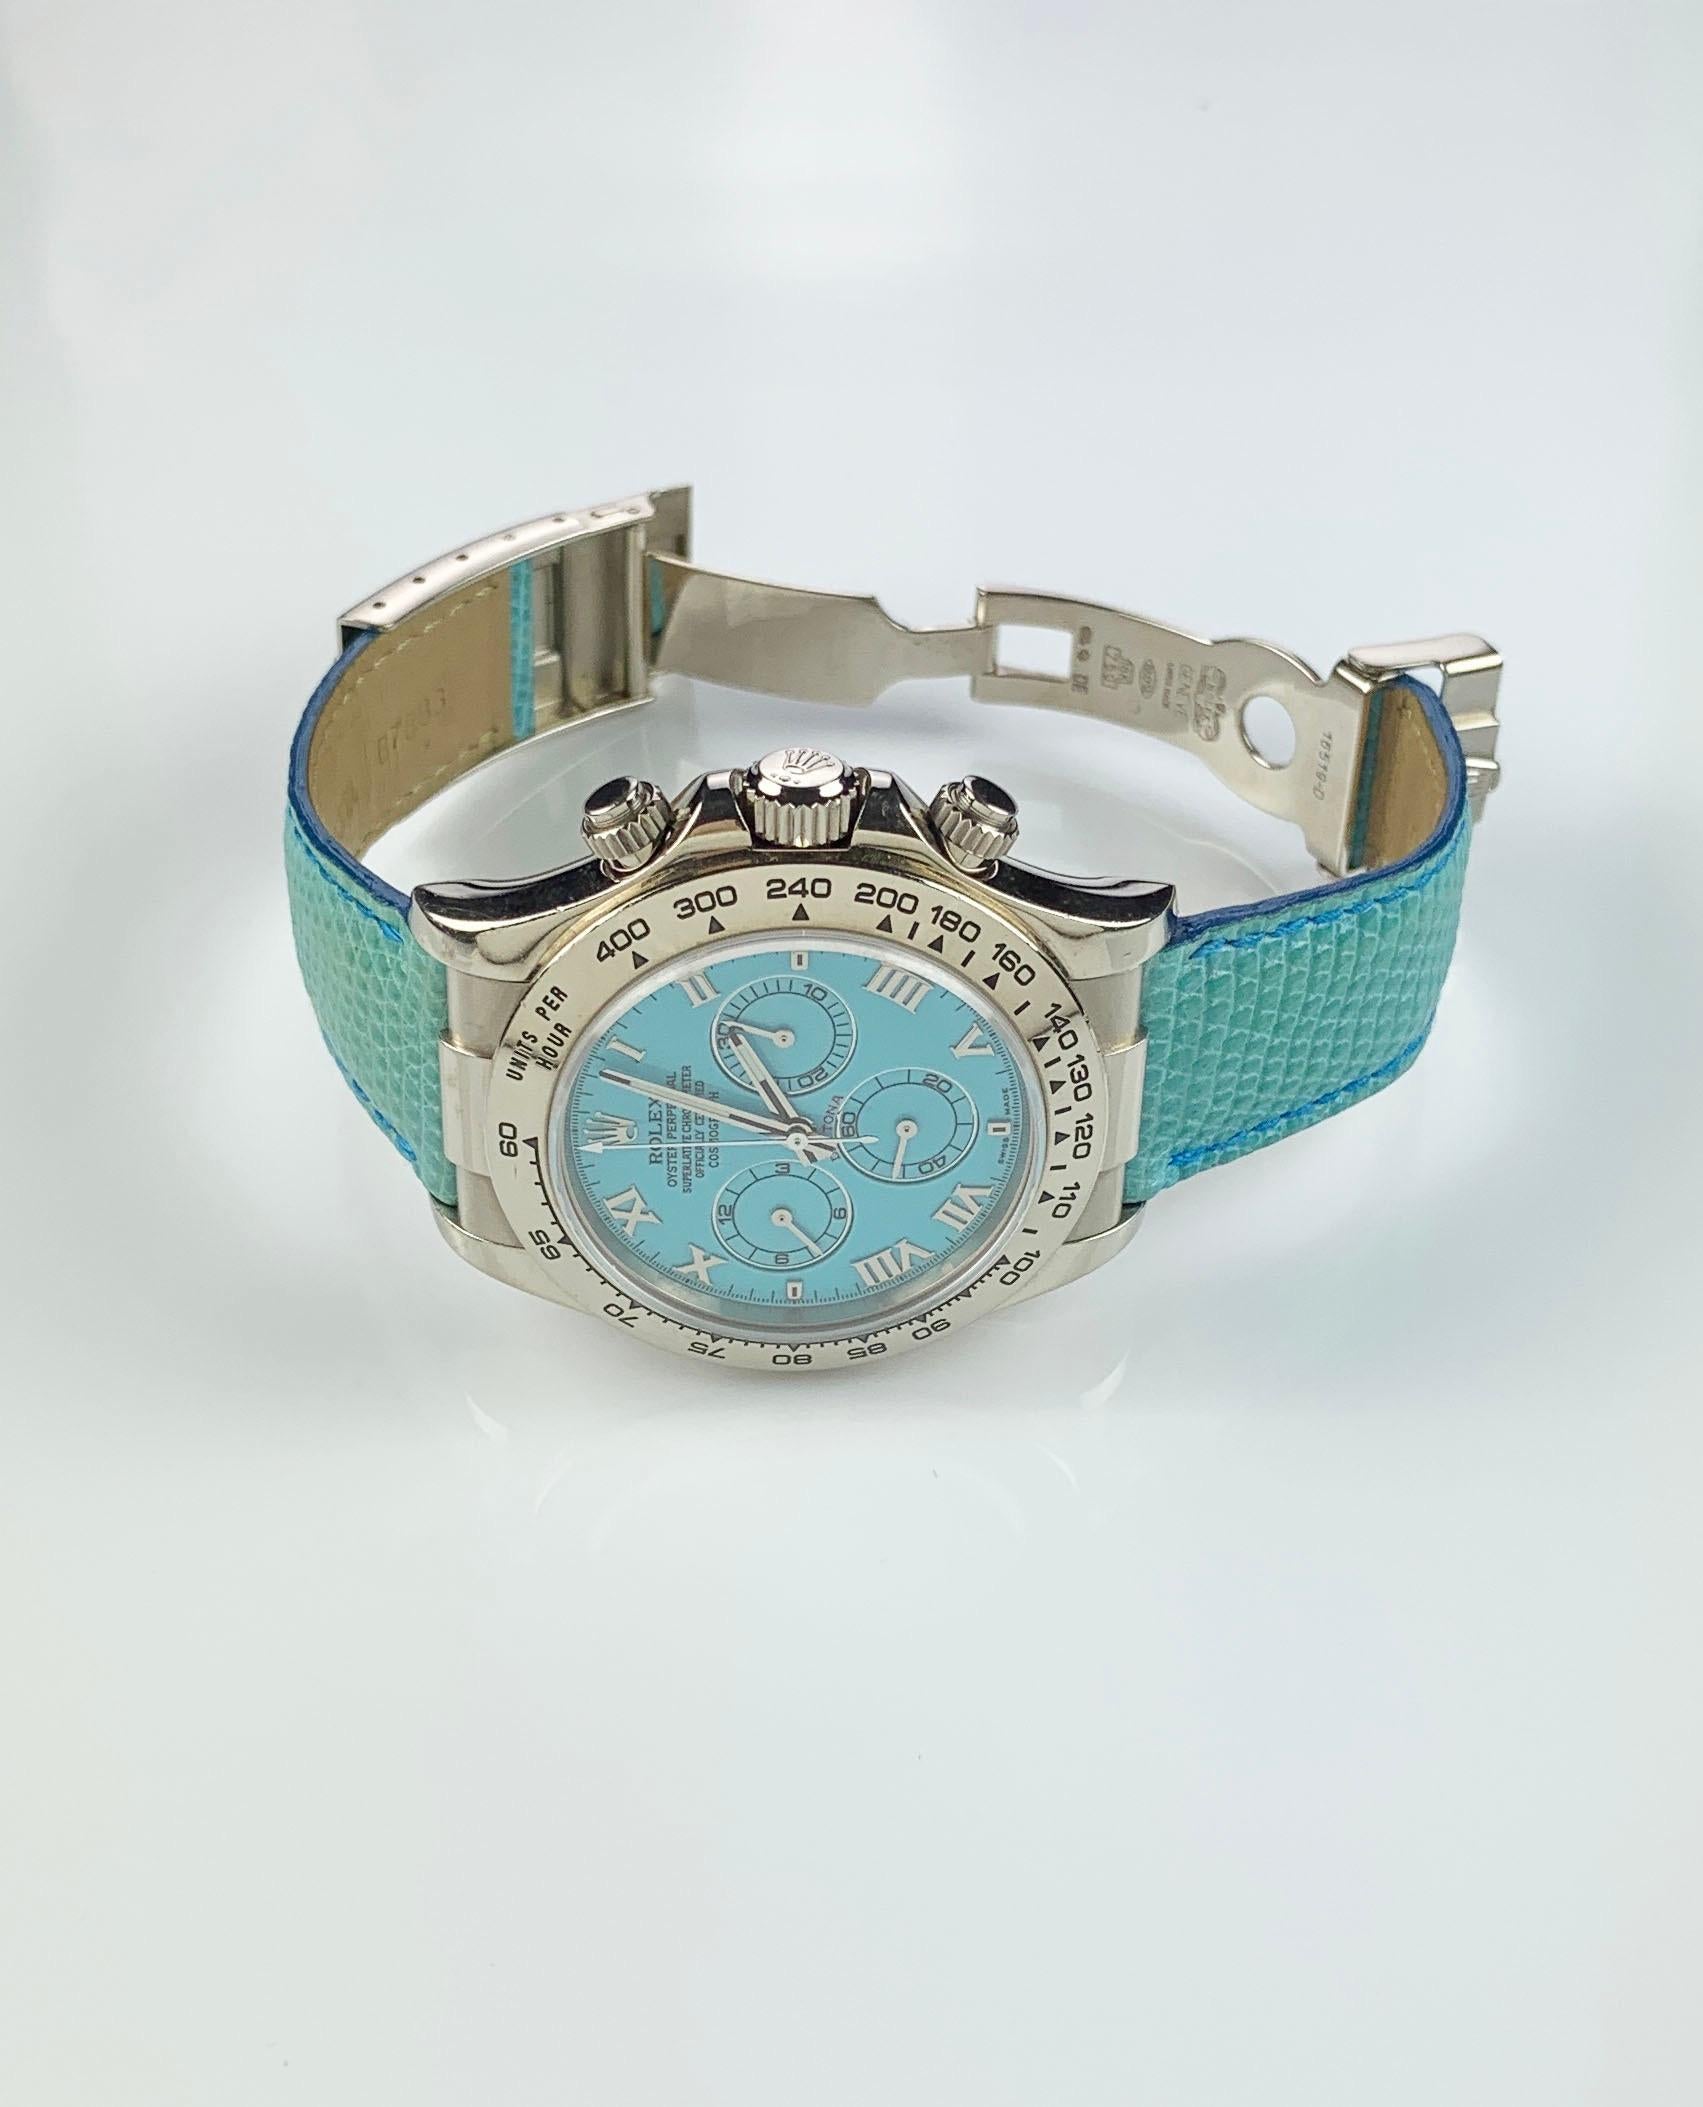 Rolex 18K White Gold Oyster Perpetual Cosmograph Daytona Wristwatch
Rare Factory Blue Turquoise Dial with Three Sub-Dials
18K White Gold Bezel Which Shows Wear and Some Use
40mm in size 
Rolex Calibre 4130 Automatic Chronograph Movement
Sapphire